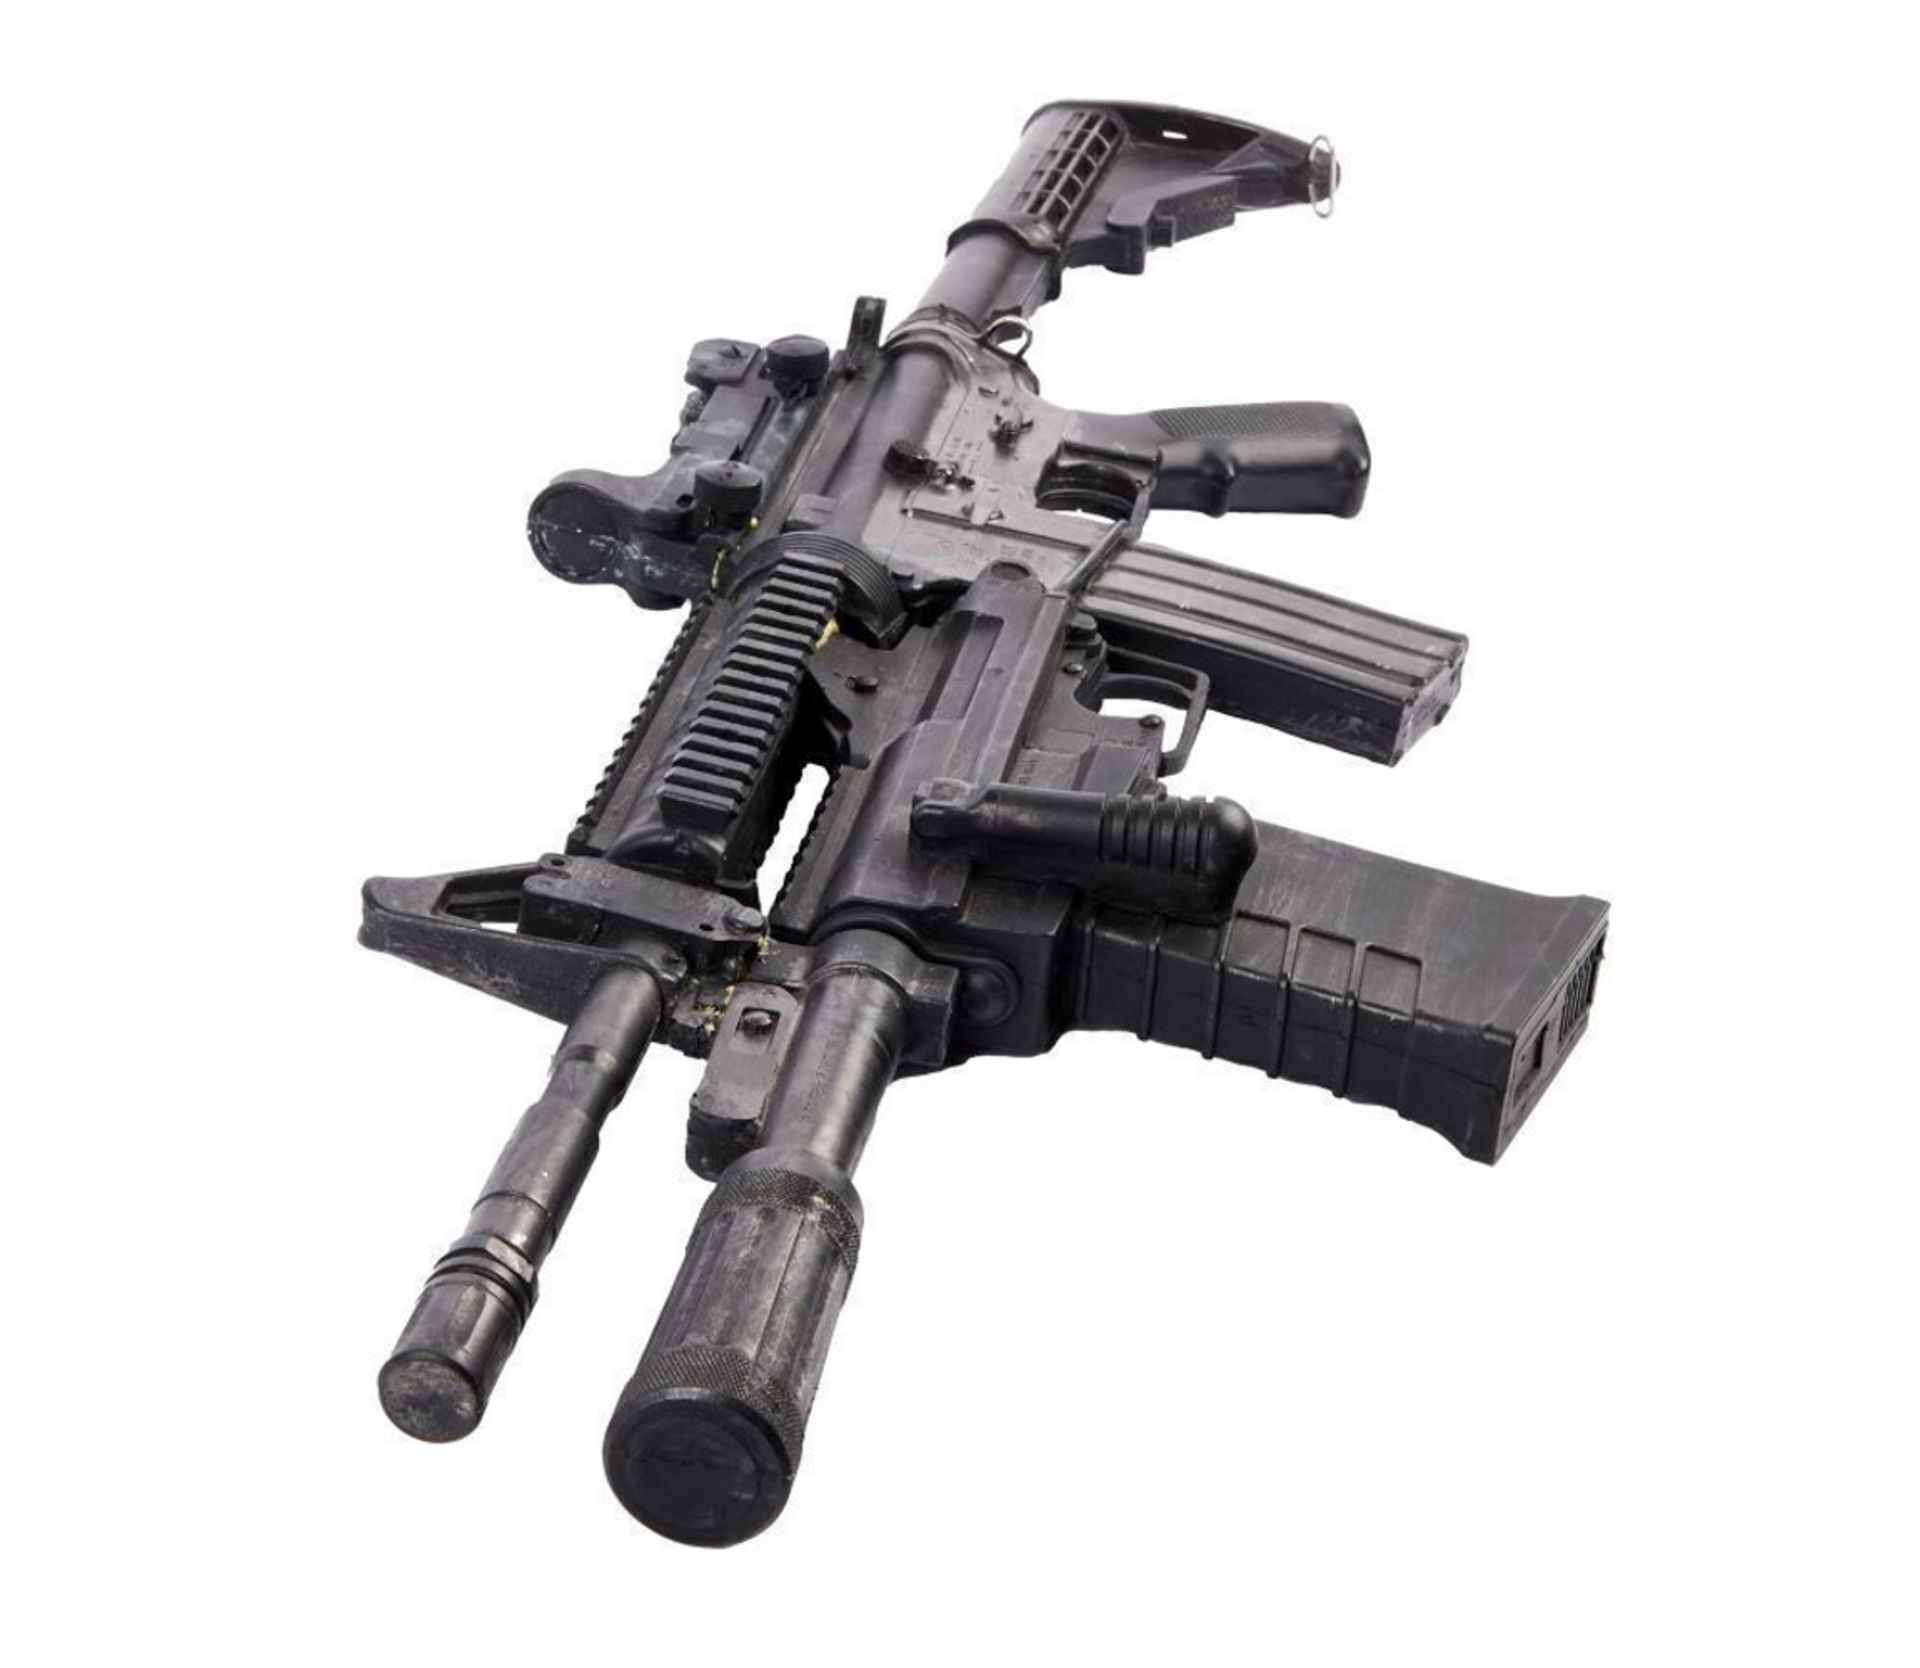 TERMINATOR SALVATION | CHRISTIAN BALE "JOHN CONNOR" M4 RIFLE AND GRENADE LAUNCHER PROPS - Image 14 of 17